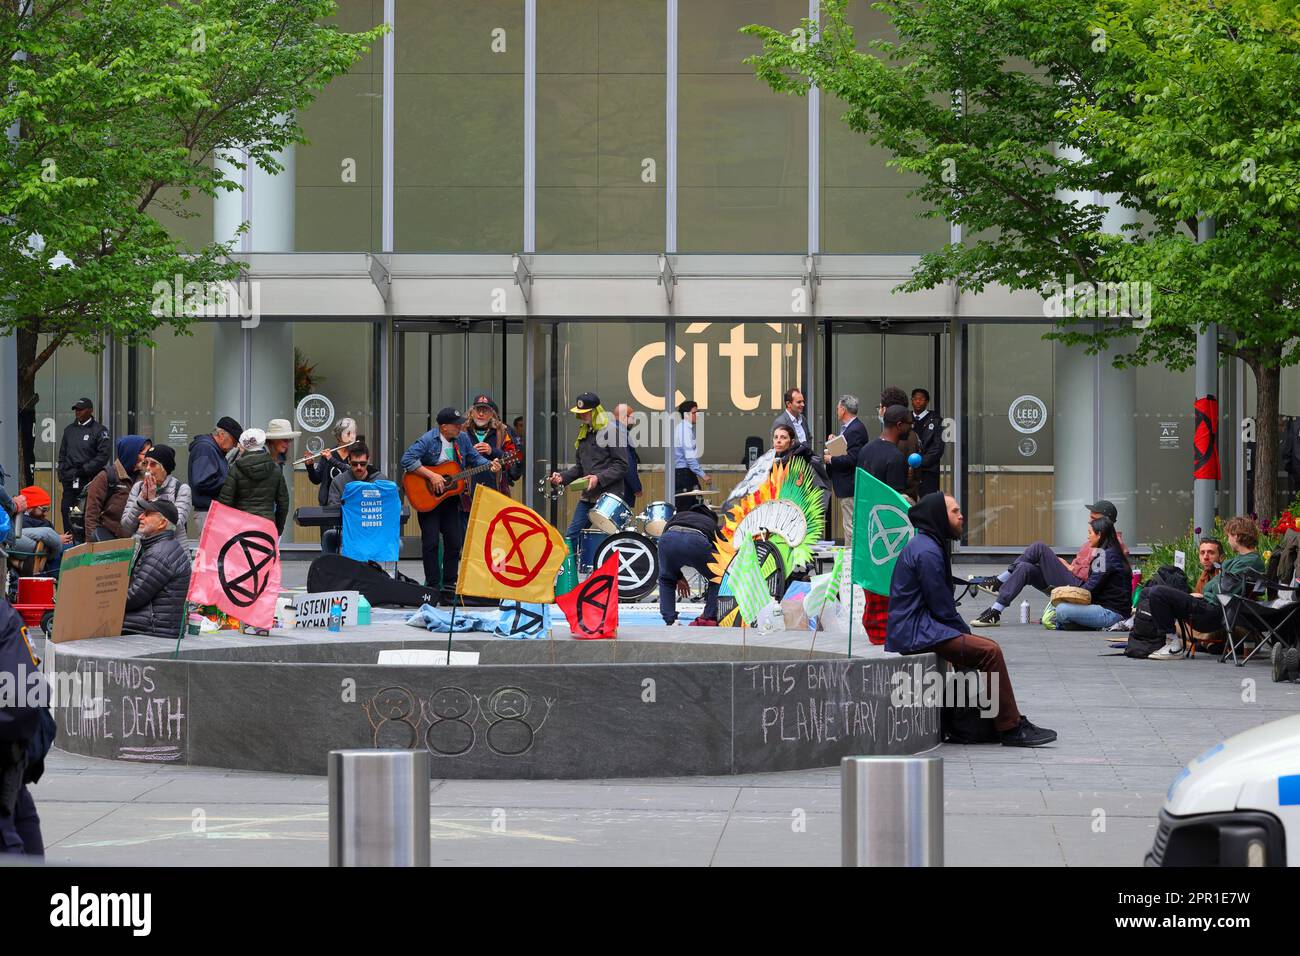 April 25, 2023, Extinction Rebellion stages a sit-in outside Citi headquarters in New York. They want Citigroup to stop funding fossil fuel companies. Stock Photo